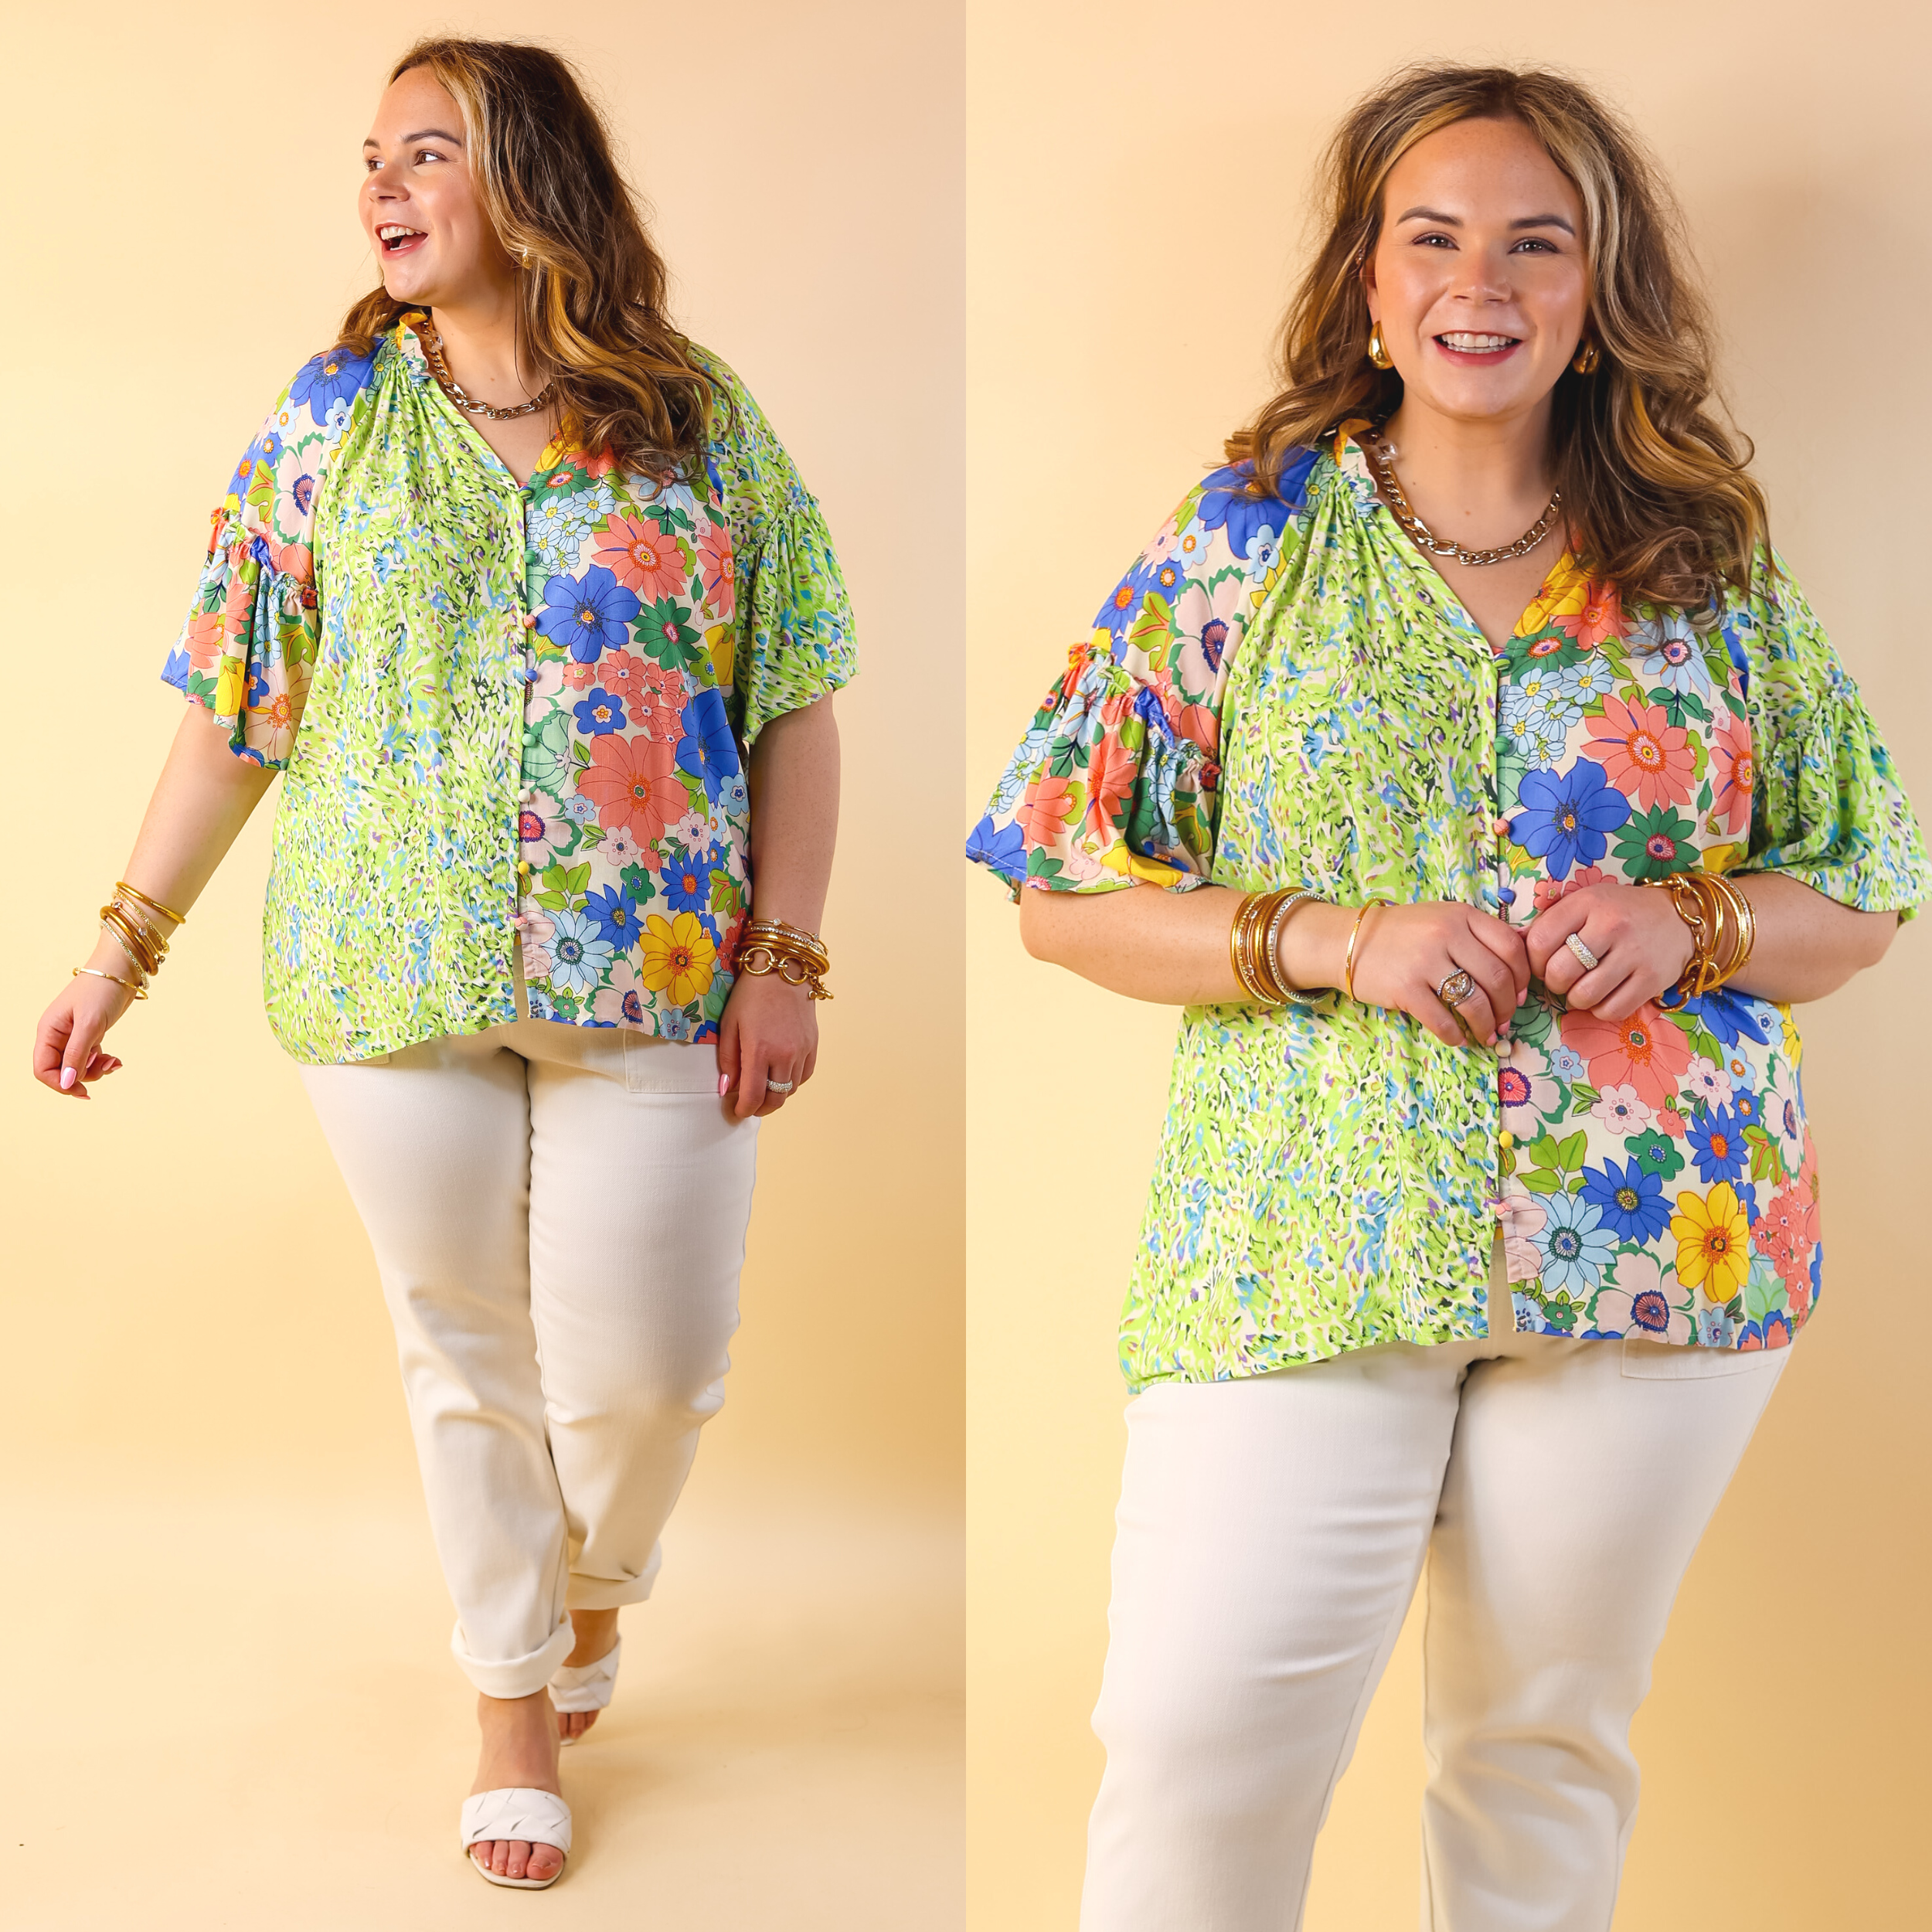 Double Time Abstract Print and Floral Print Top in Green and Blue - Giddy Up Glamour Boutique